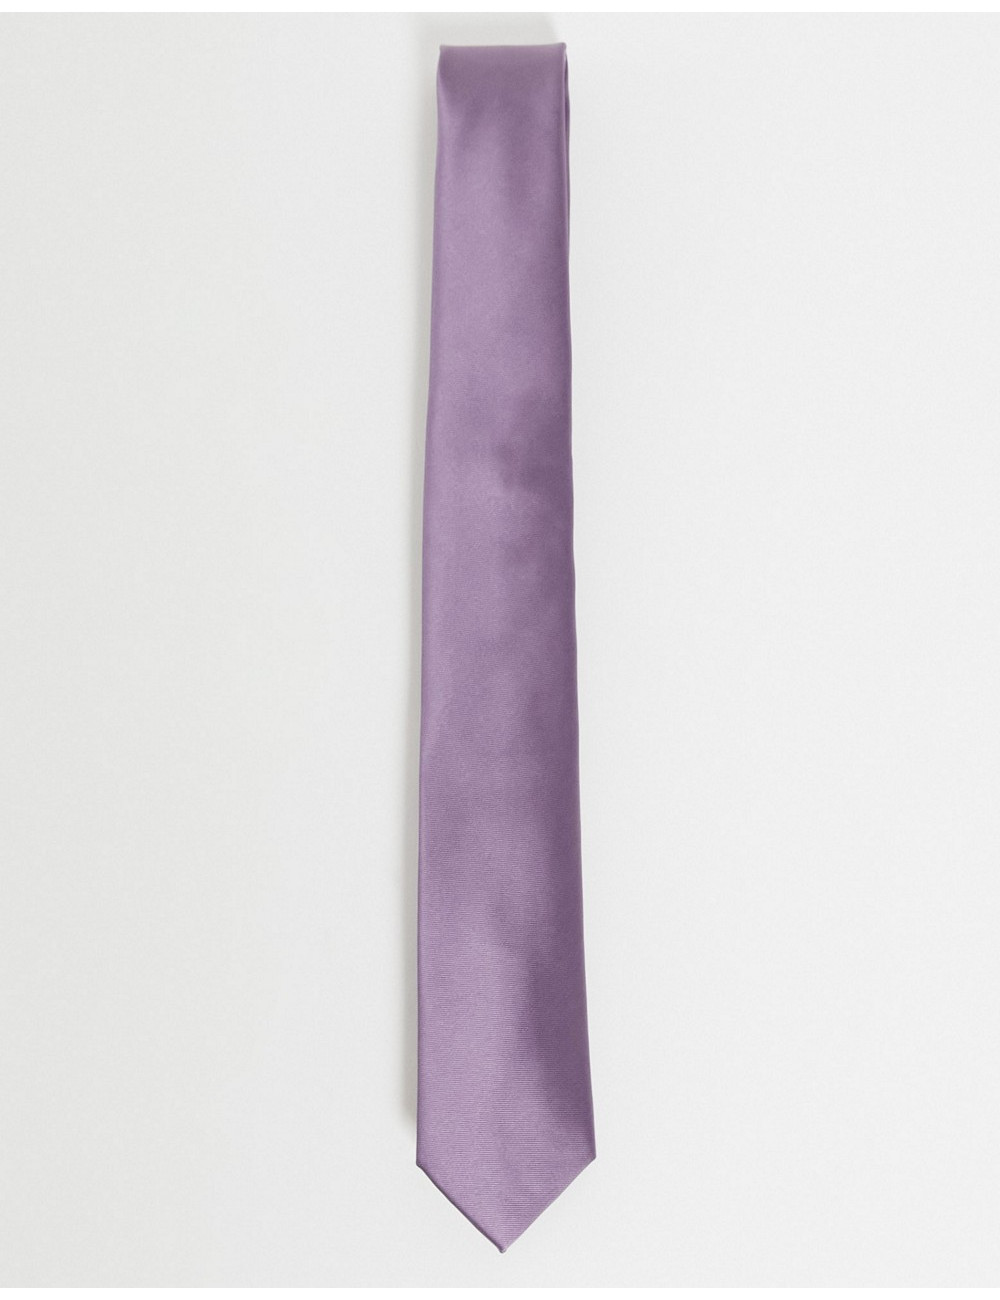 Twisted Tailor tie in mauve...